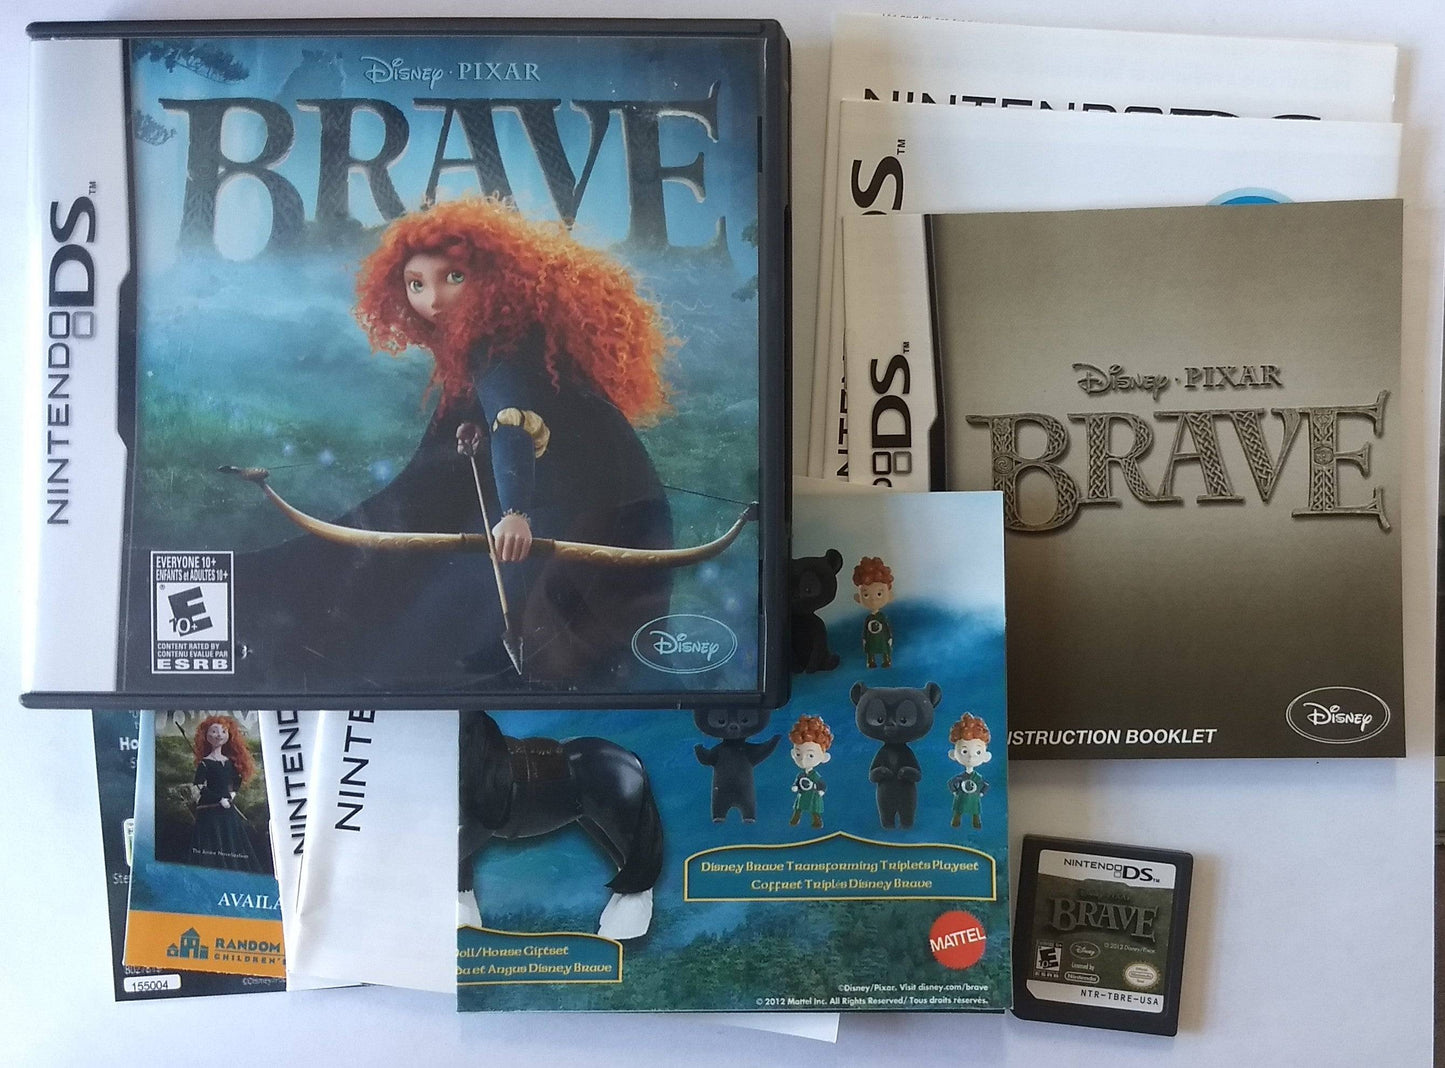 BRAVE THE VIDEO GAME (NINTENDO DS) - jeux video game-x